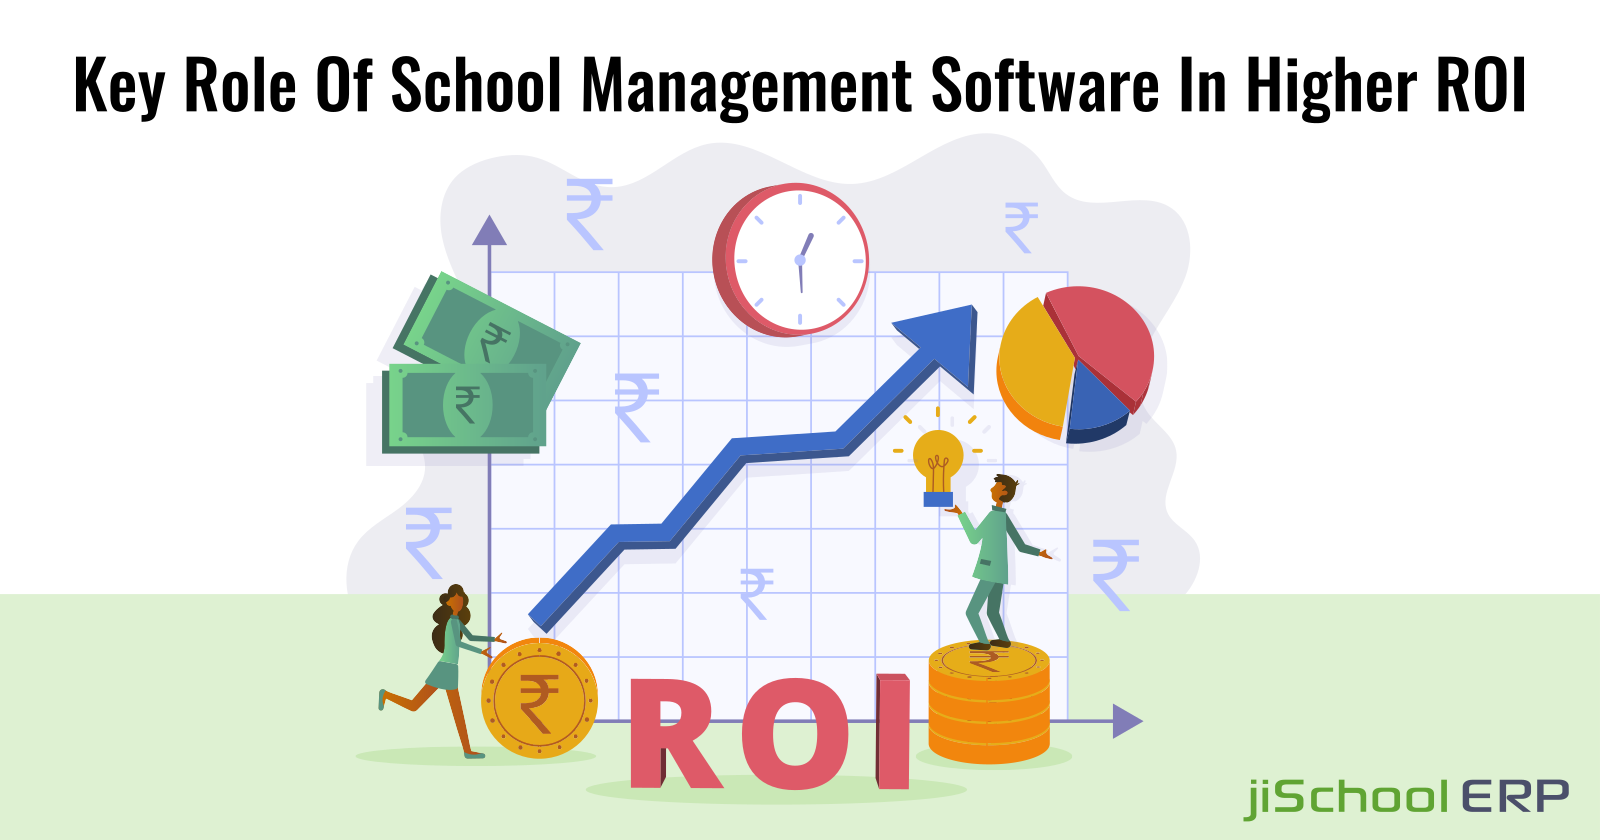 Key Role Of School Management Software In Higher ROI